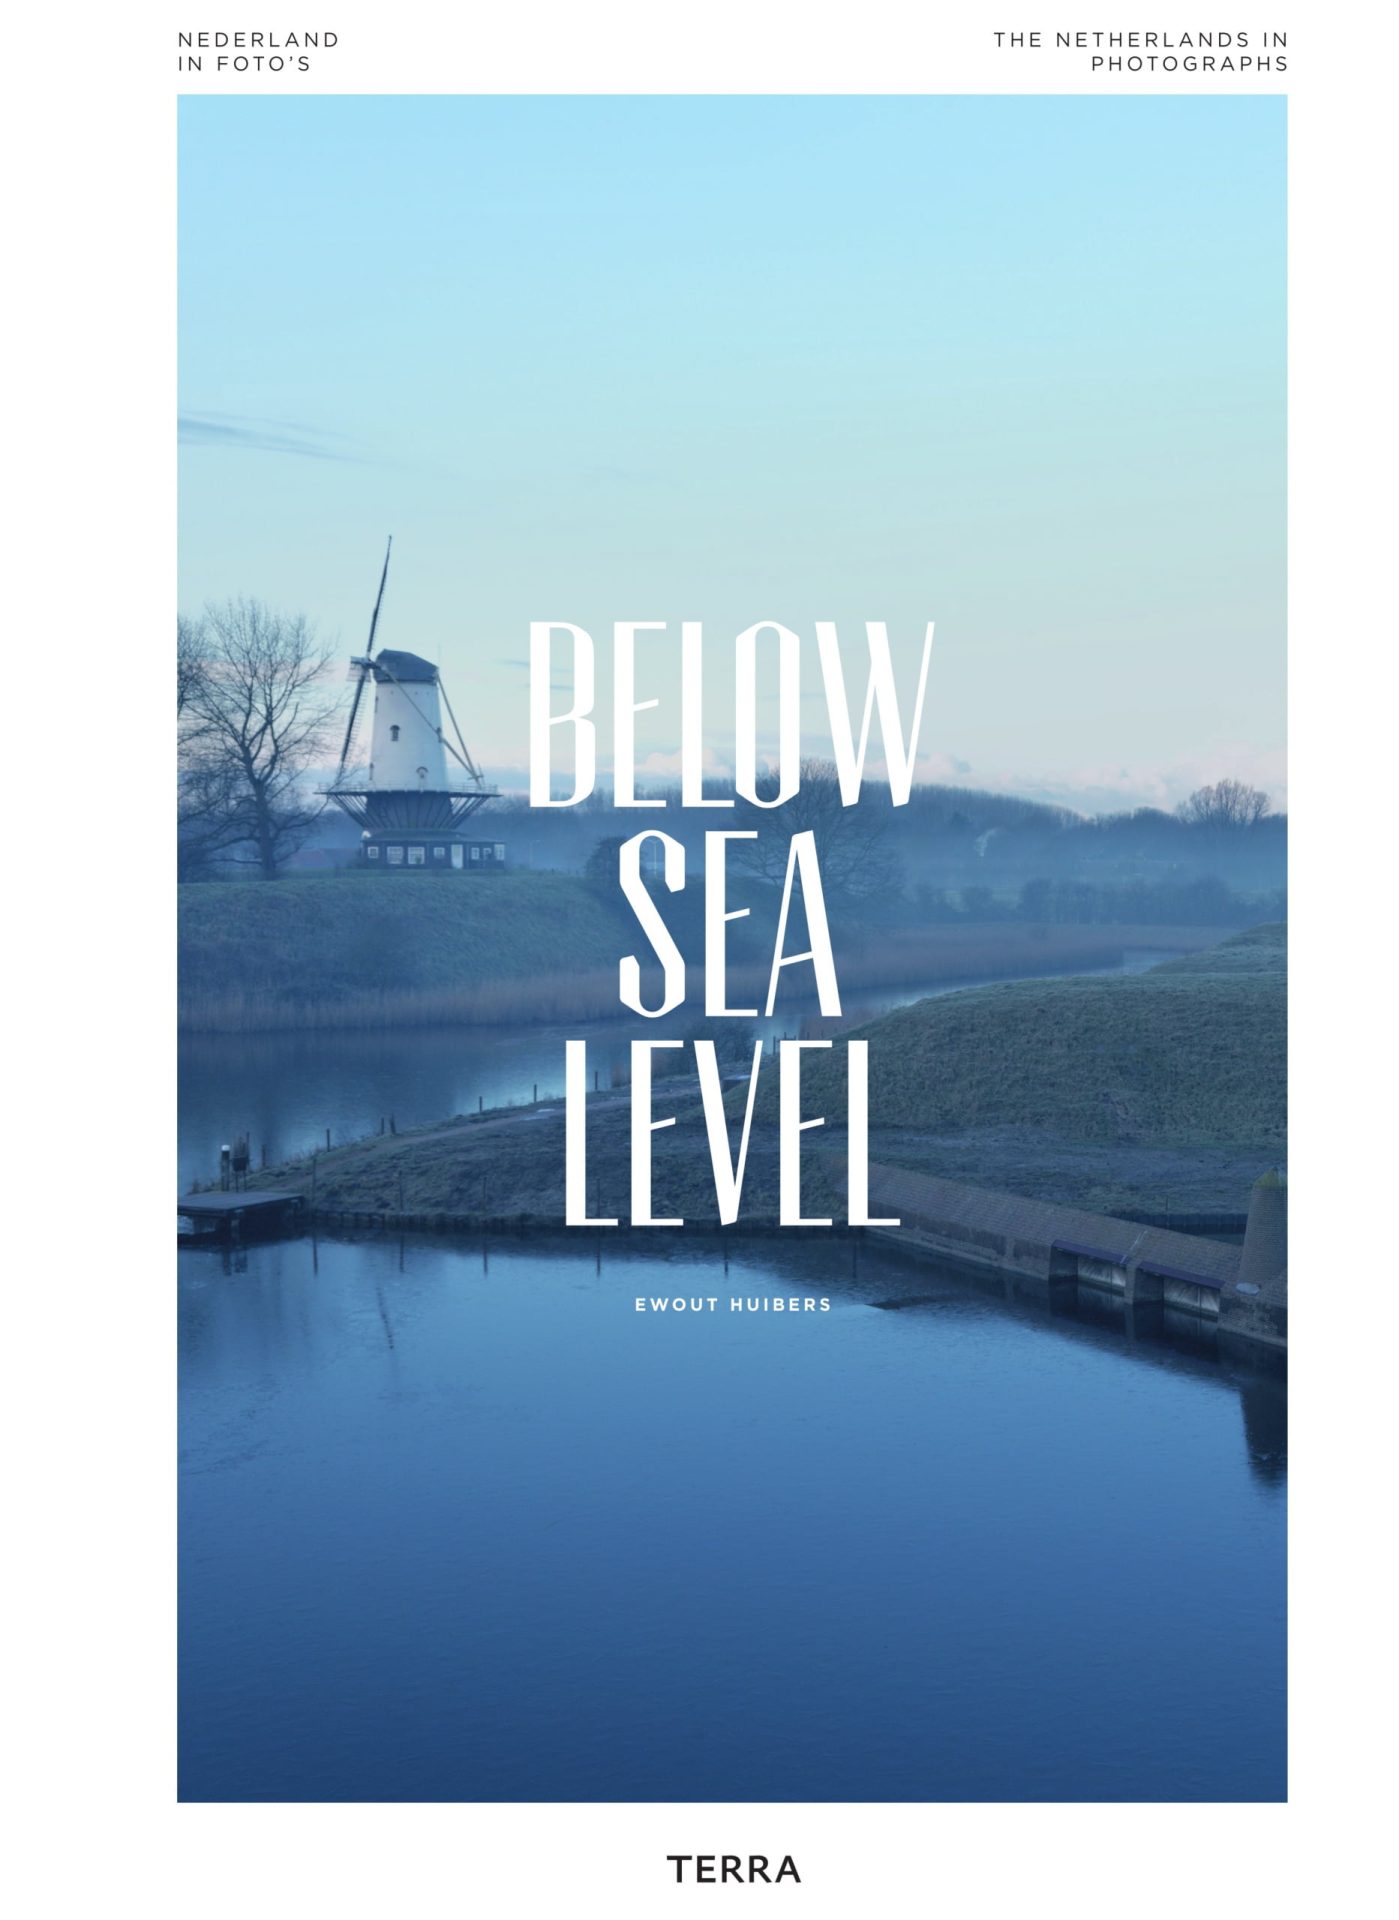 Below Sea Level – The Netherlands in Photographs